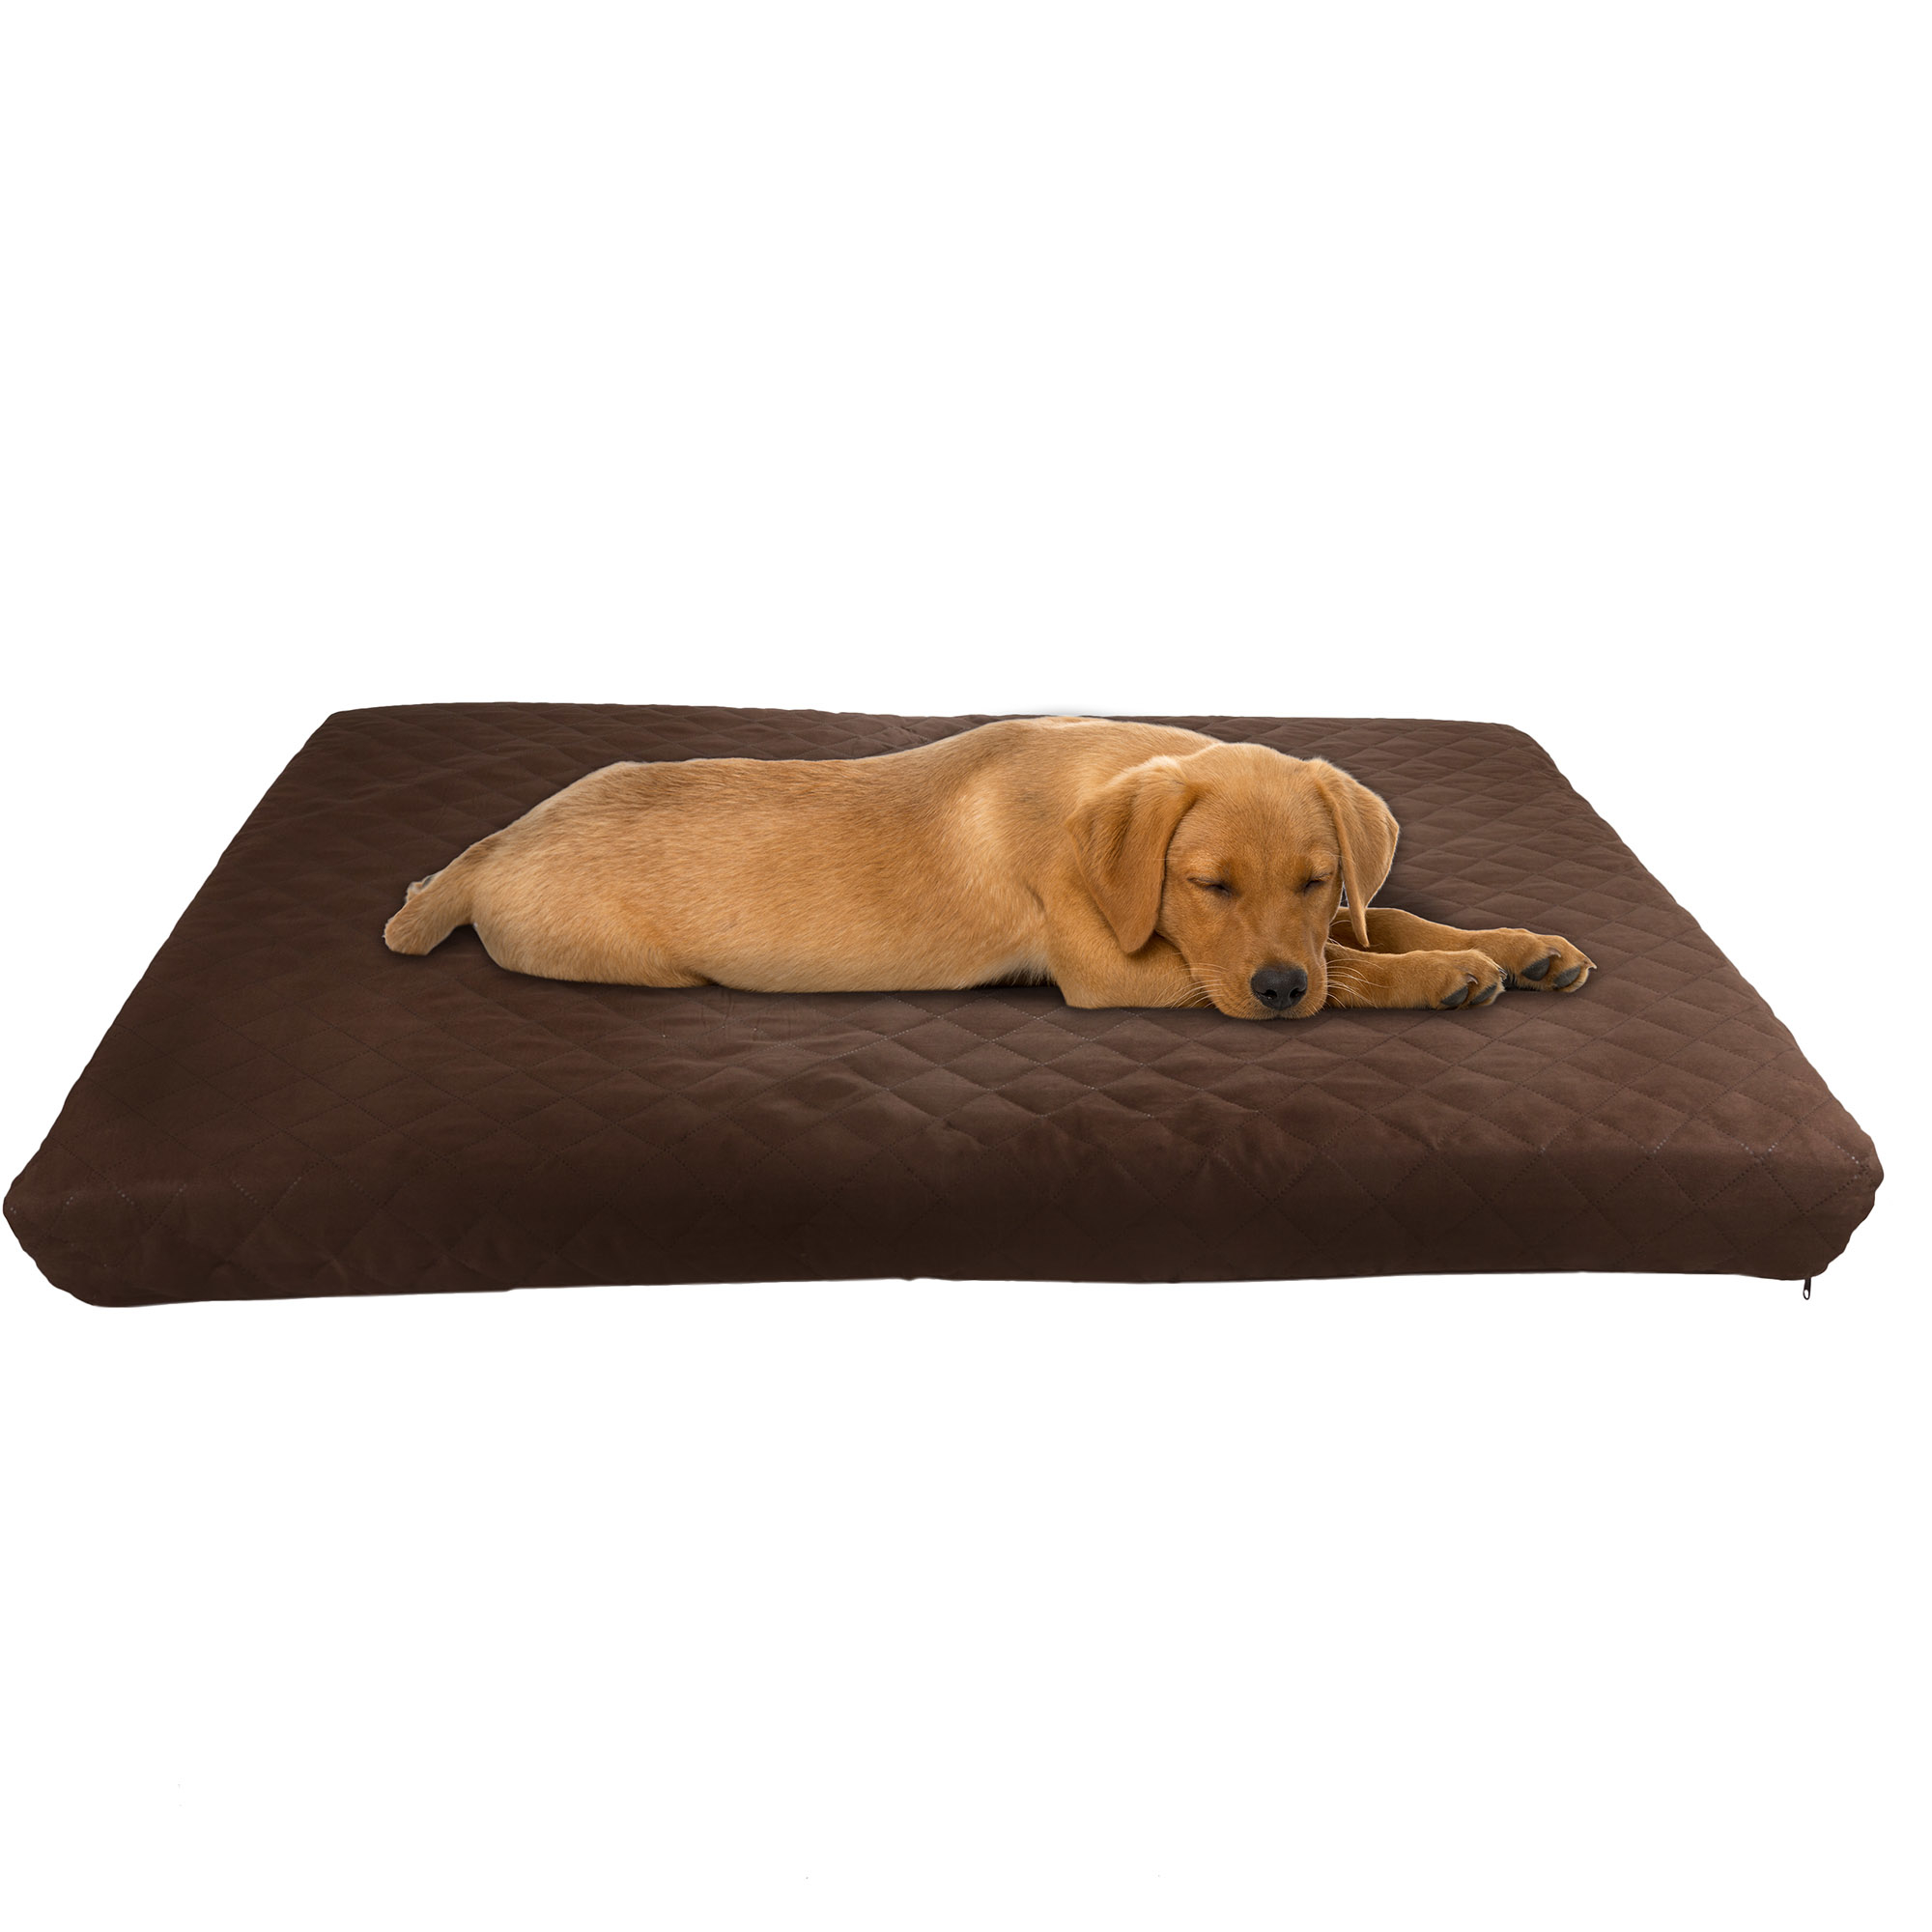 Waterproof Indoor Outdoor Memory Foam Orthopedic Medium Large Pet Dog Bed Removable Cover 27 X 36 Inches